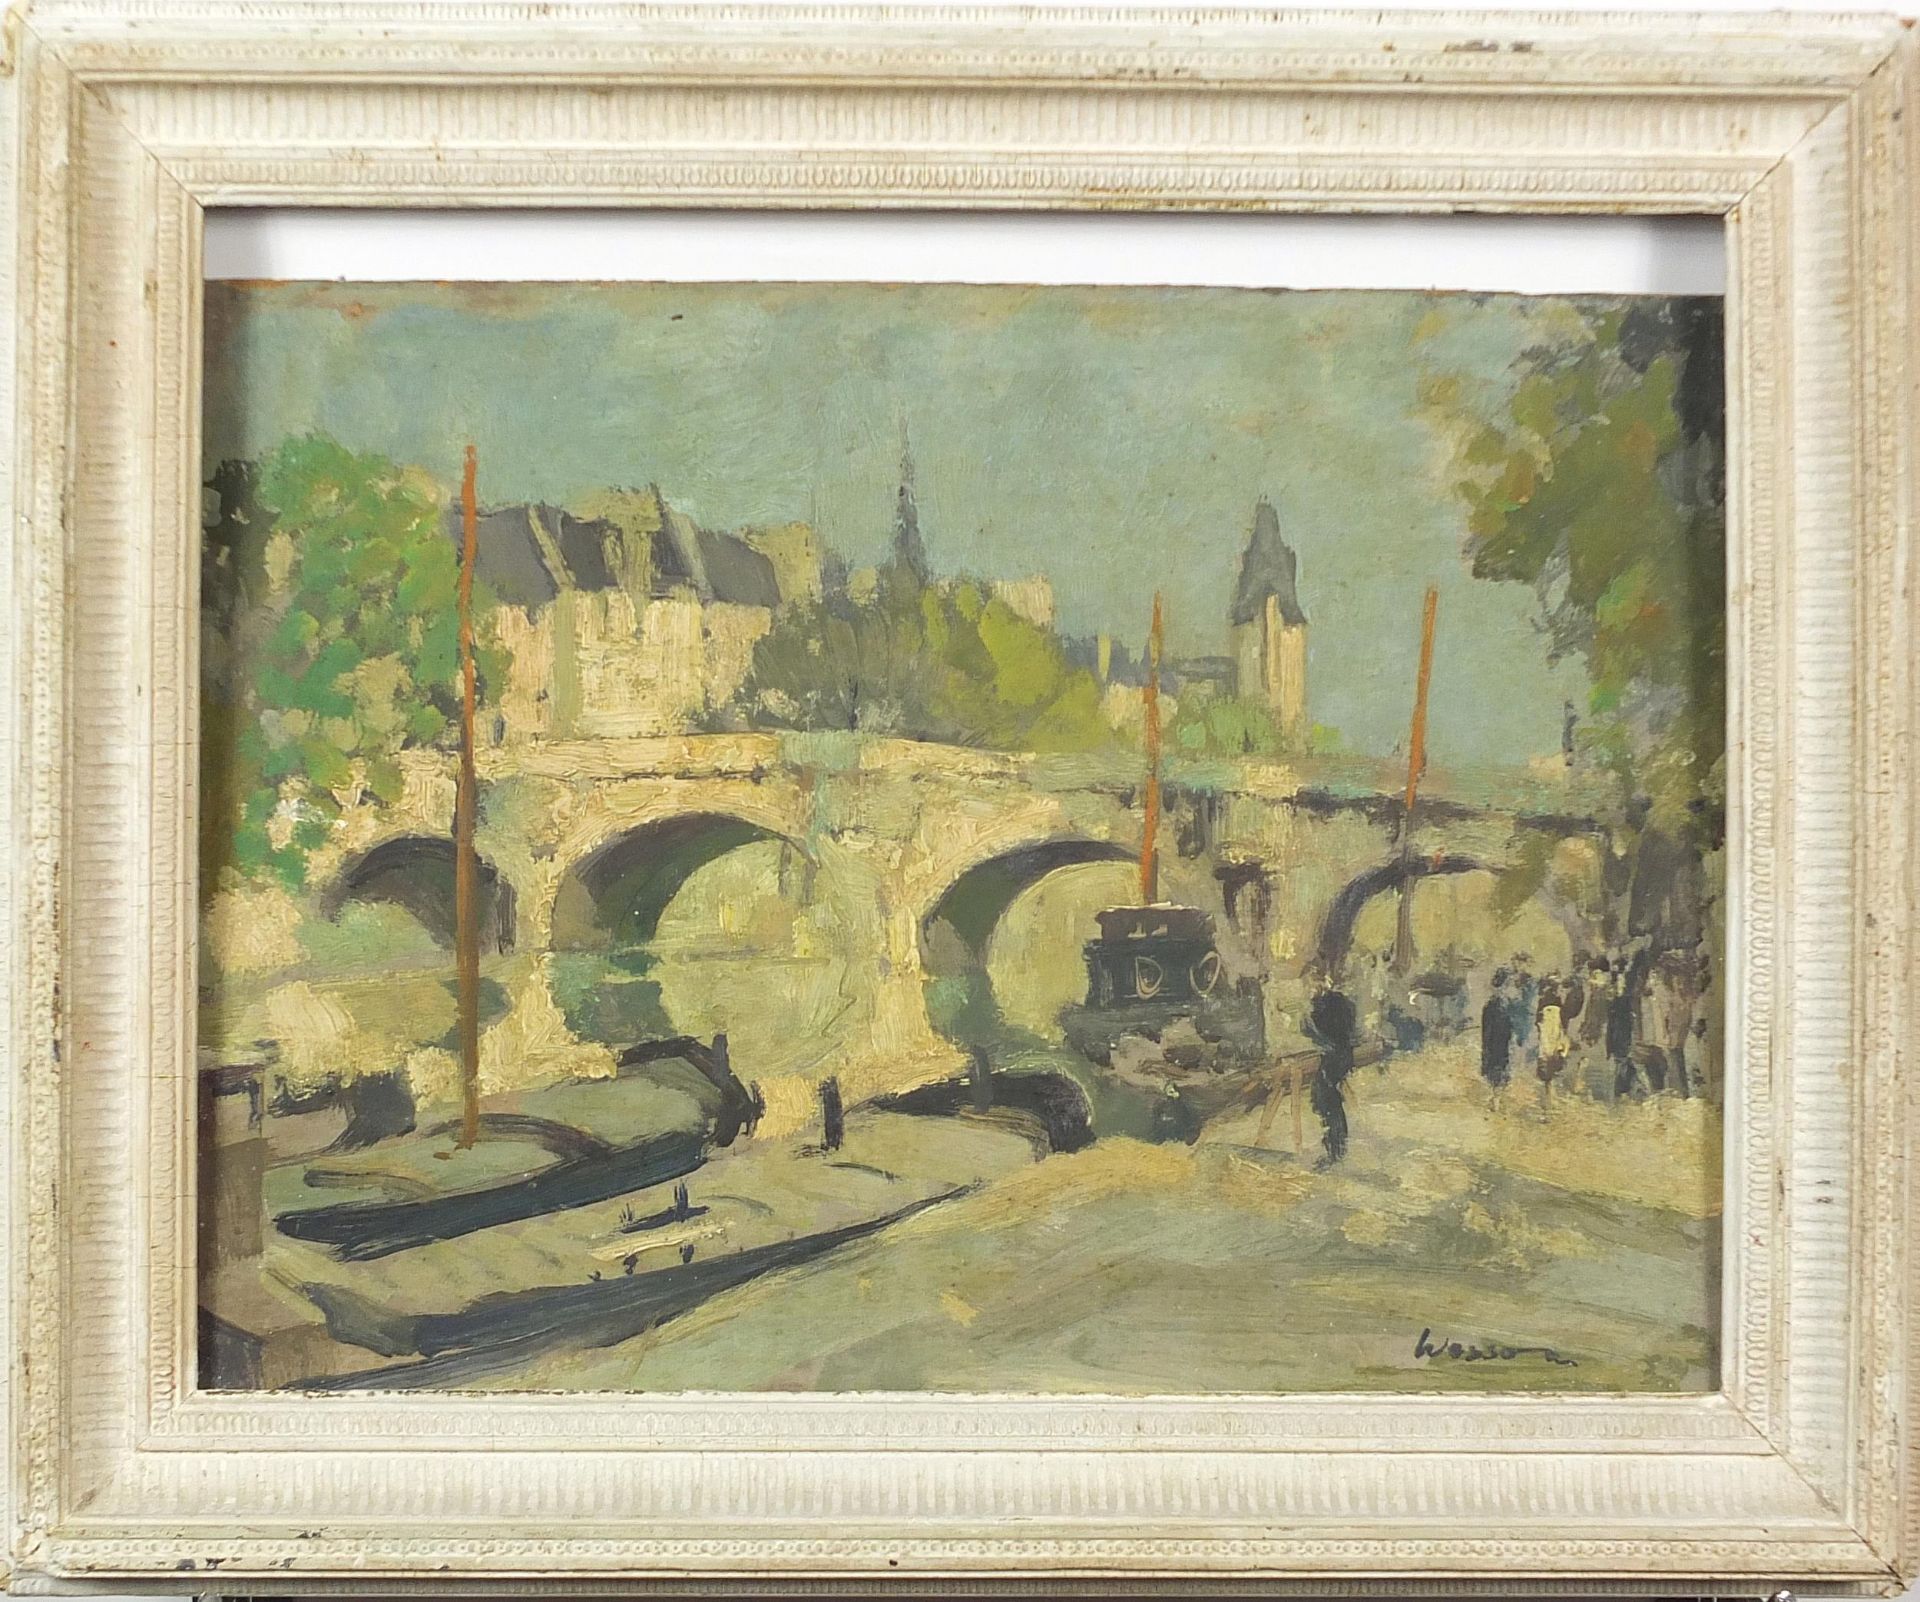 Edward Wesson - River landscape with bridge before a town, oil on board, framed, 35cm x 28cm - Image 2 of 5